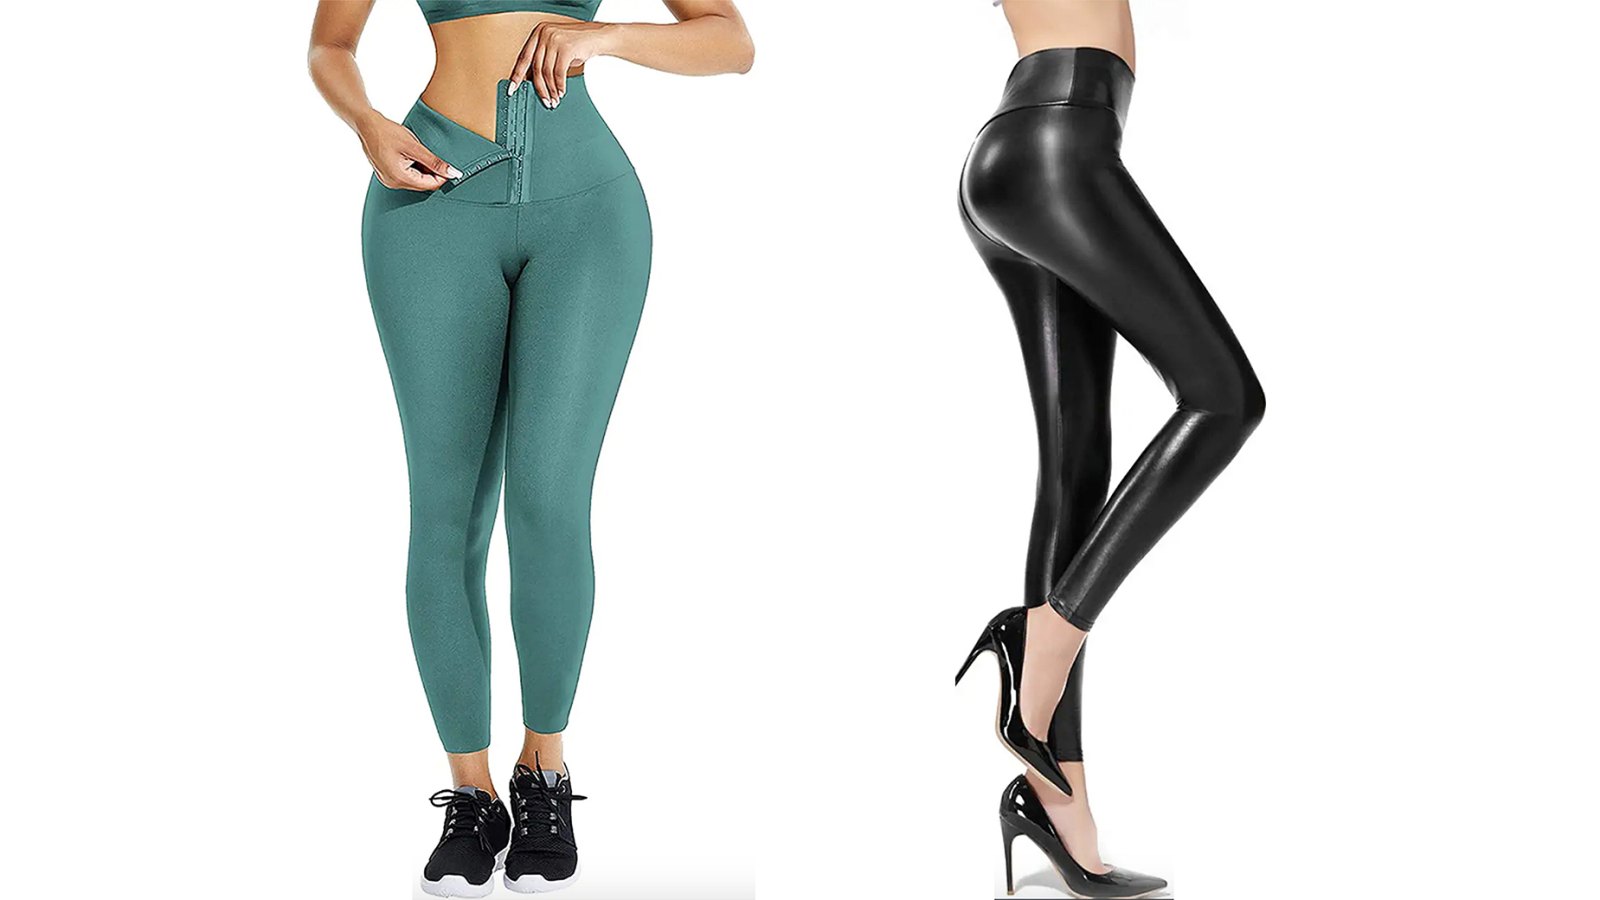 Skinny Yoga Pants for Women Tummy Control Workout Running Tights